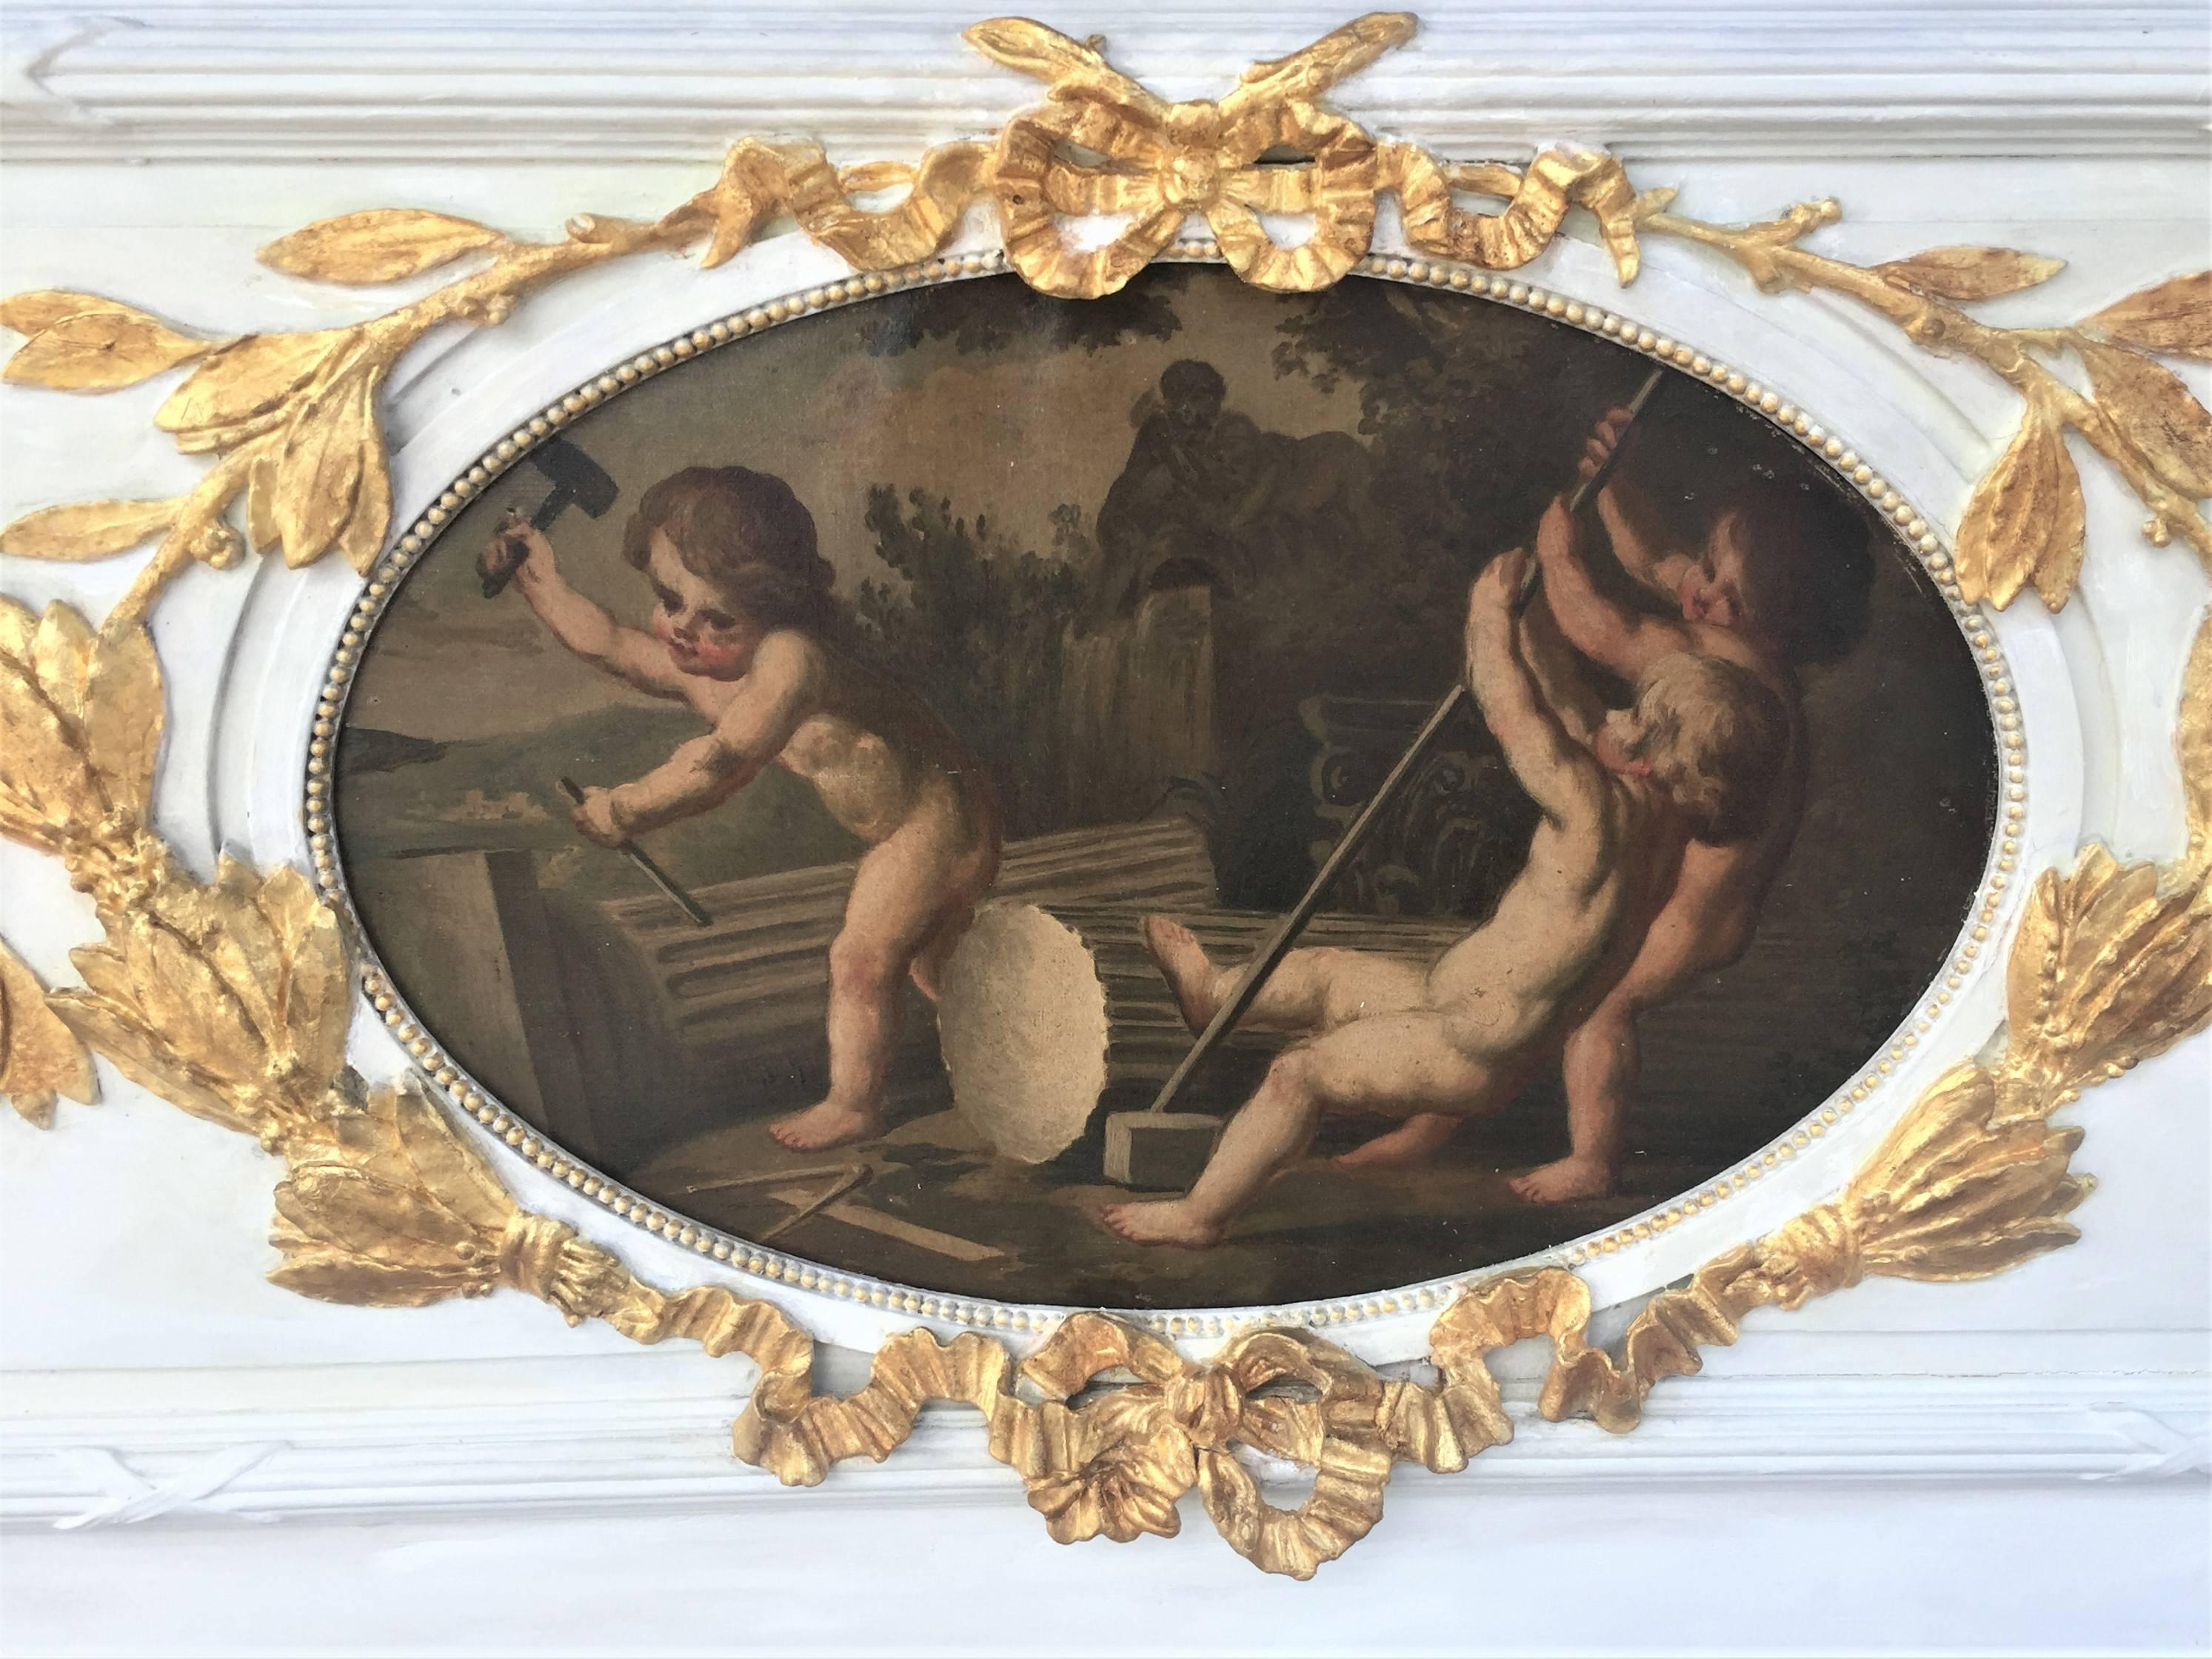 The architectural frieze fragment probably removed from panelling (boiserie). The neoclassical styled panel with leaf garland intertwined with ribbon surrounding a central oil inset of cherubs or putti doing construction with marble columns,